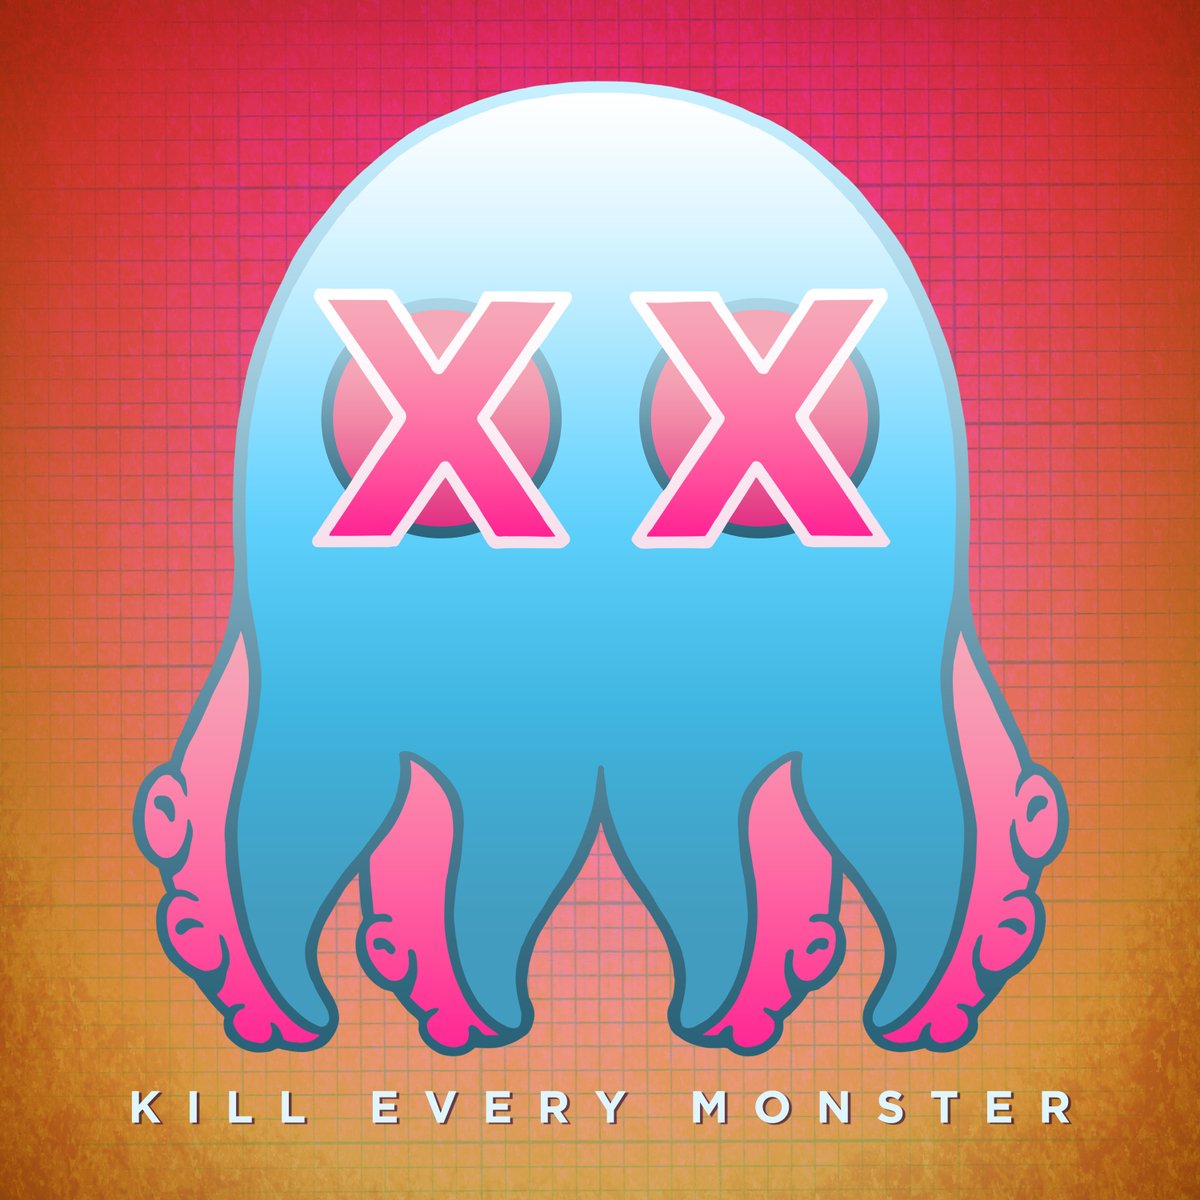 Happy #TransDayOfVisibility from the crew at Kill Every Monster.